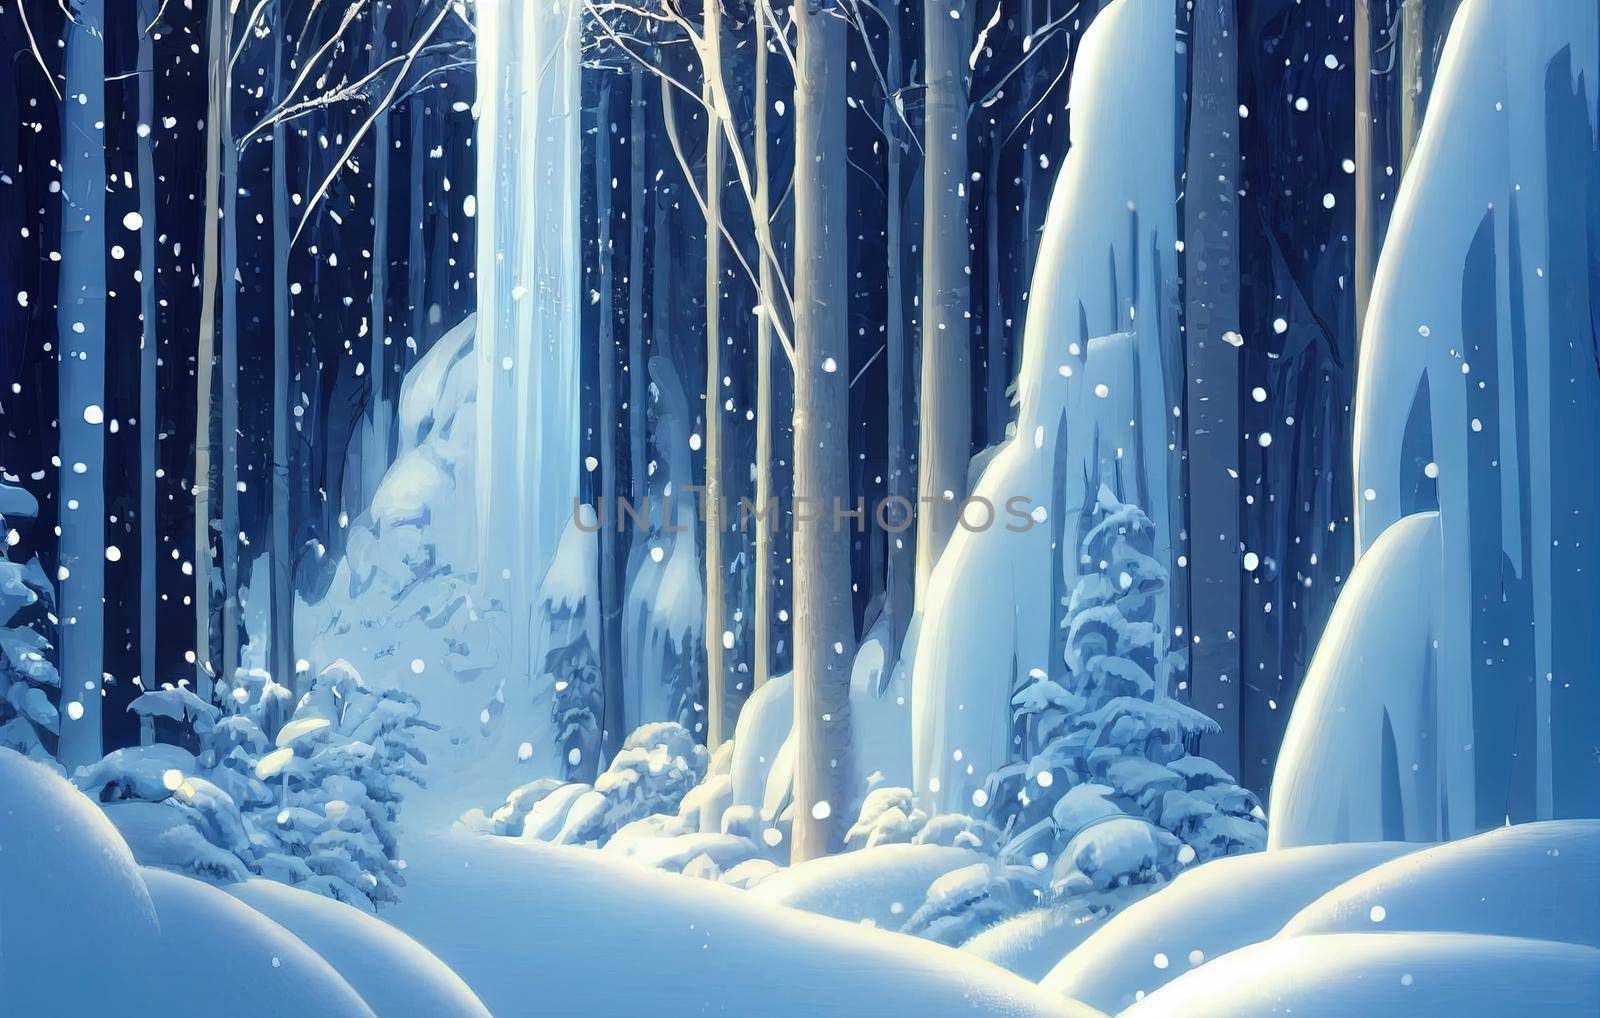 Waterfall in the winter forest. Snowy winter forest waterfall. High quality 2d illustration. by 2ragon